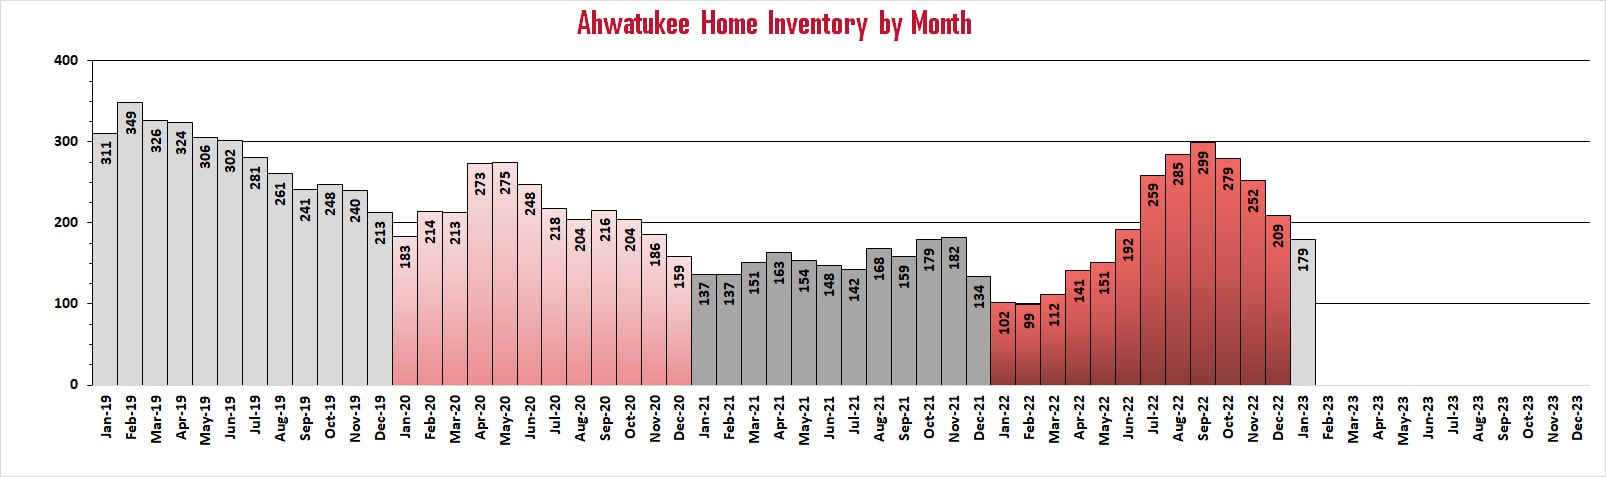 Ahwatukee Market Reports - Inventory of Ahwatukee Homes For Sale | Troy Erickson Realtor